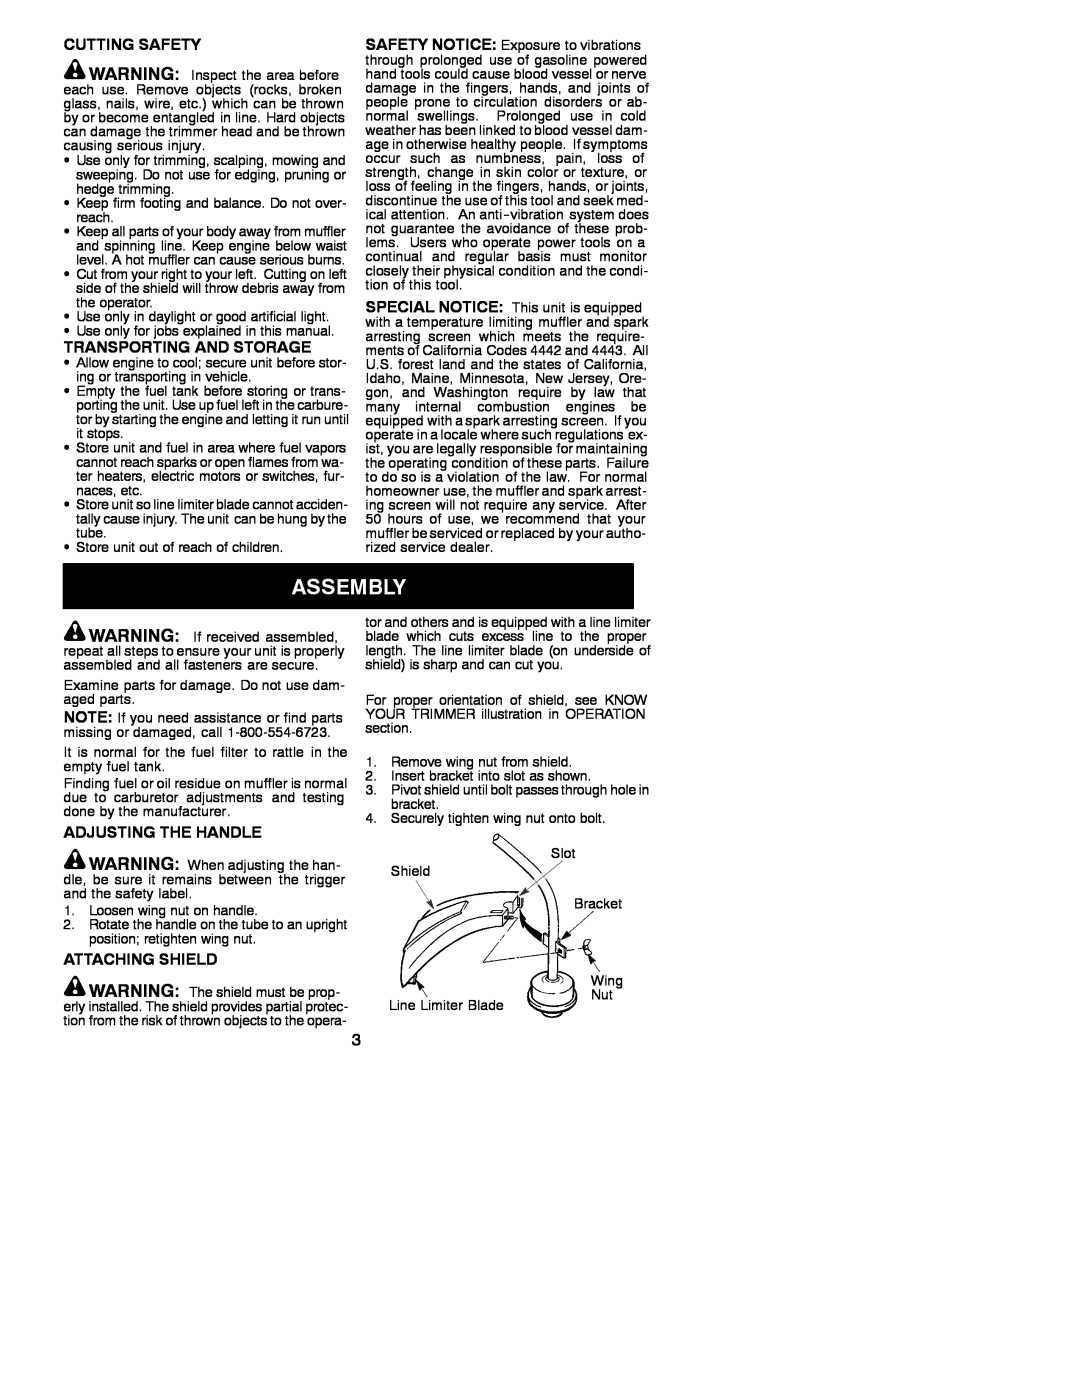 Weed Eater 530086929 instruction manual Cutting Safety, Transporting And Storage, Adjusting The Handle, Attaching Shield 